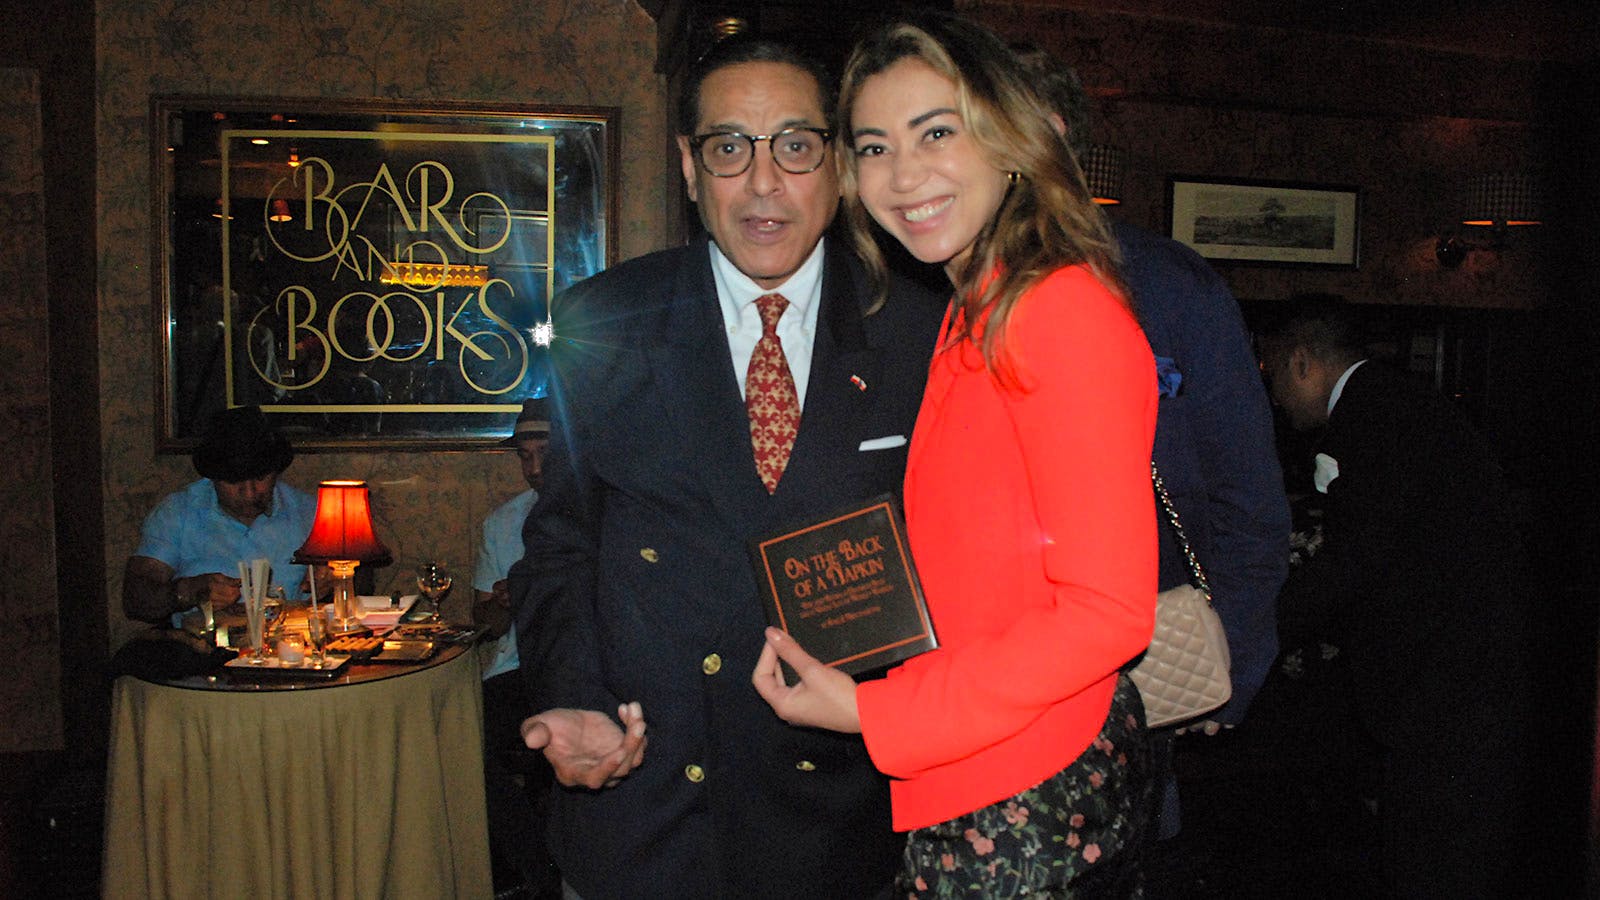 Bar and Books owner Raju S. Mirchandani with guest Elena Cavalcante.